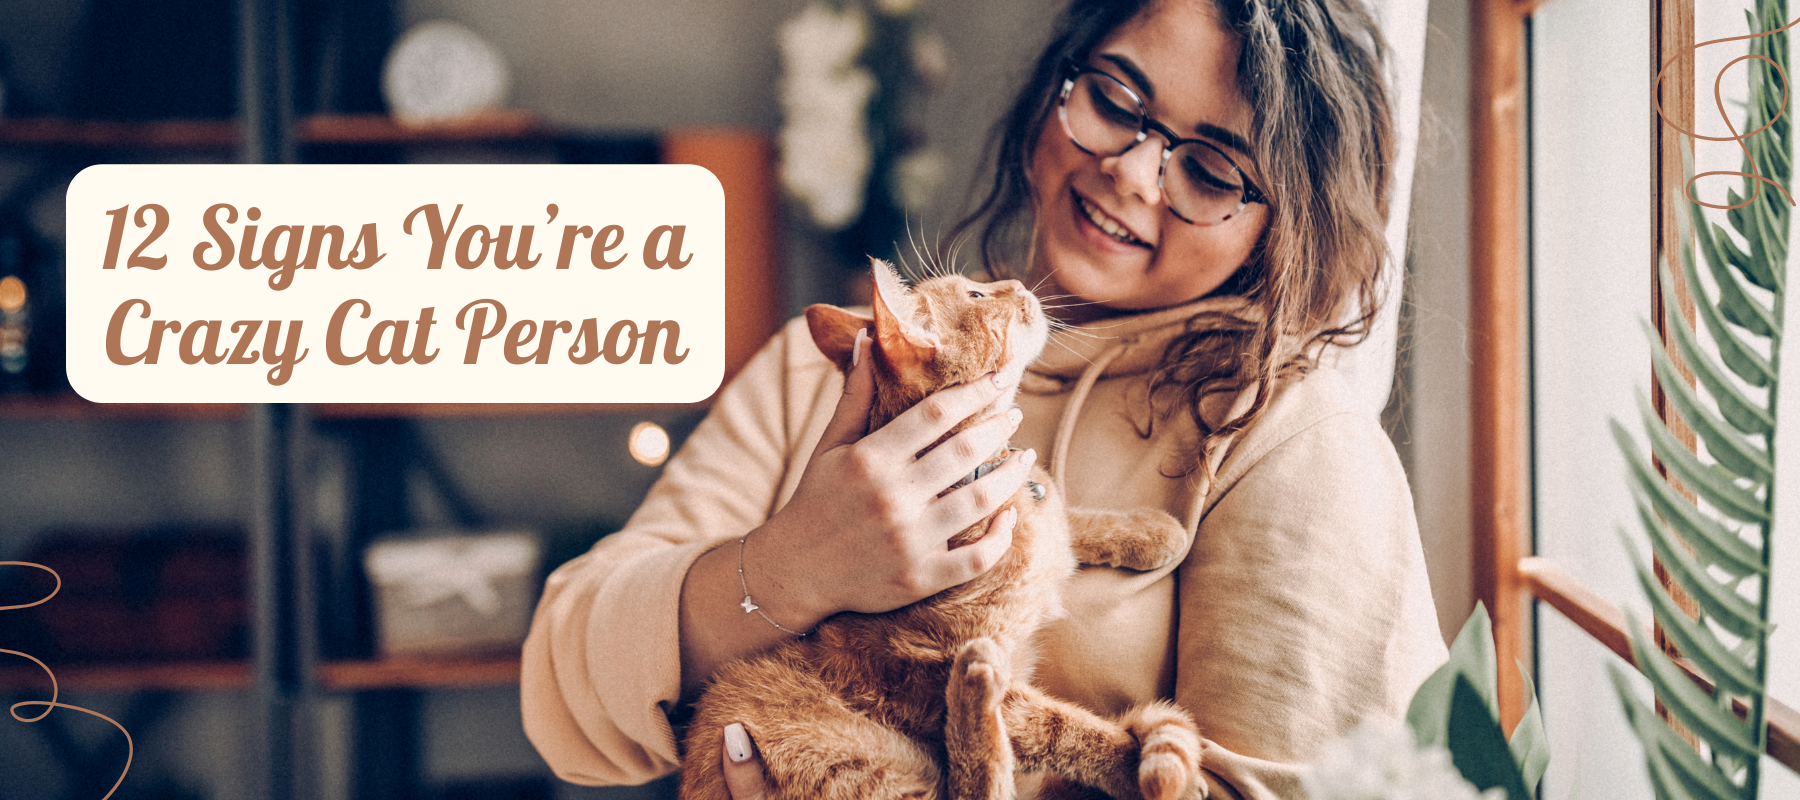 12 Signs You’re a Crazy Cat Person